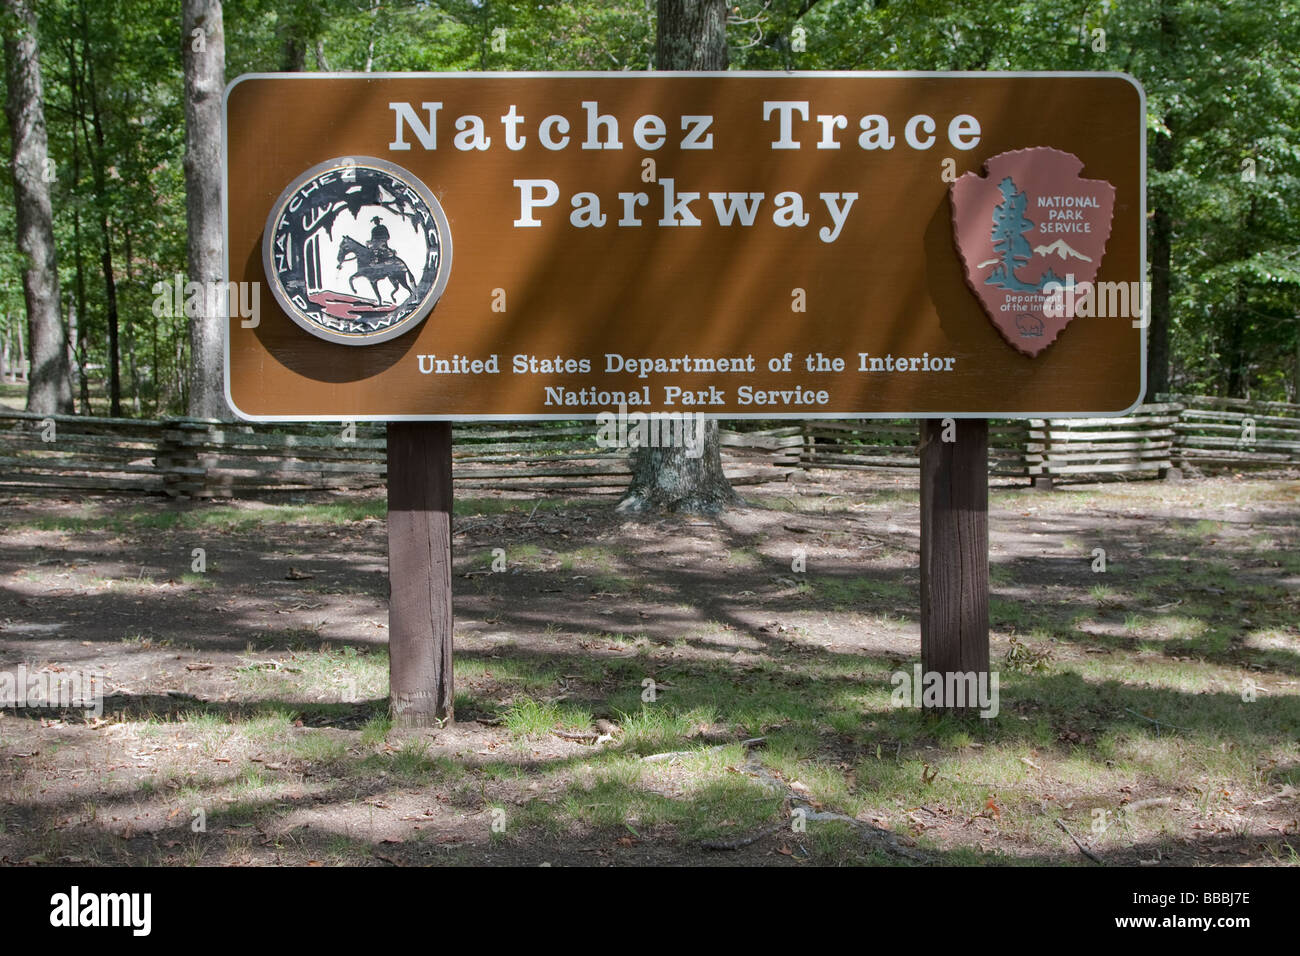 Natchez Trace Parkway Entrance Sign, Tennessee, USA. Stock Photo